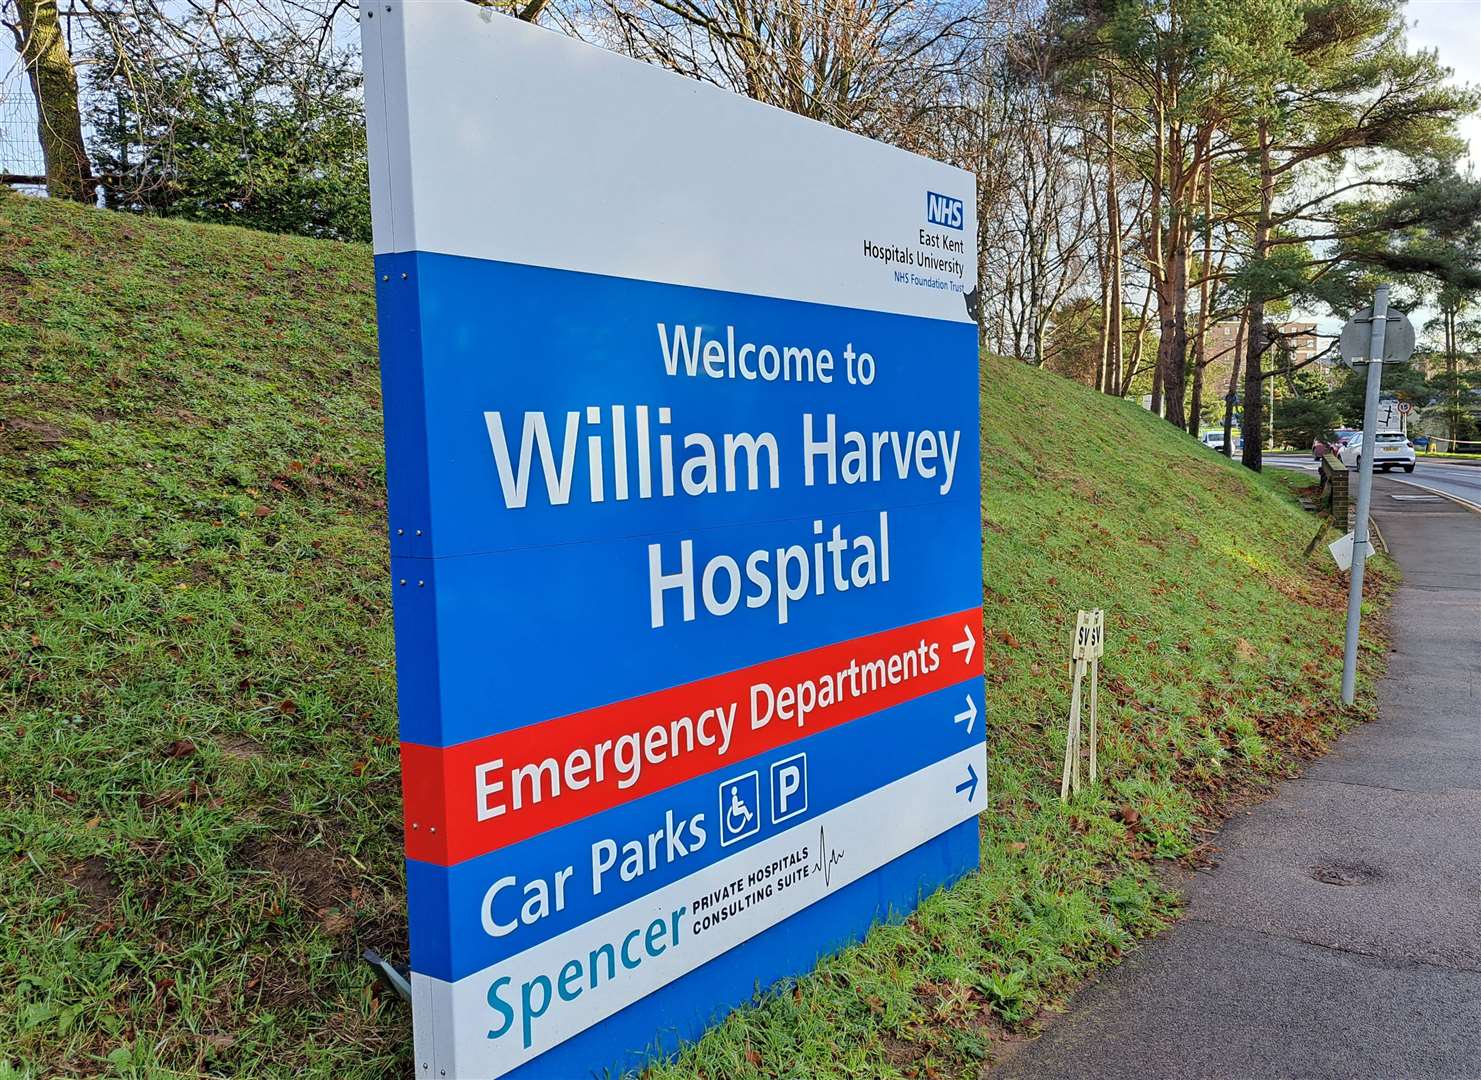 William Harvey Hospital in Ashford is one of East Kent’s maternity centres